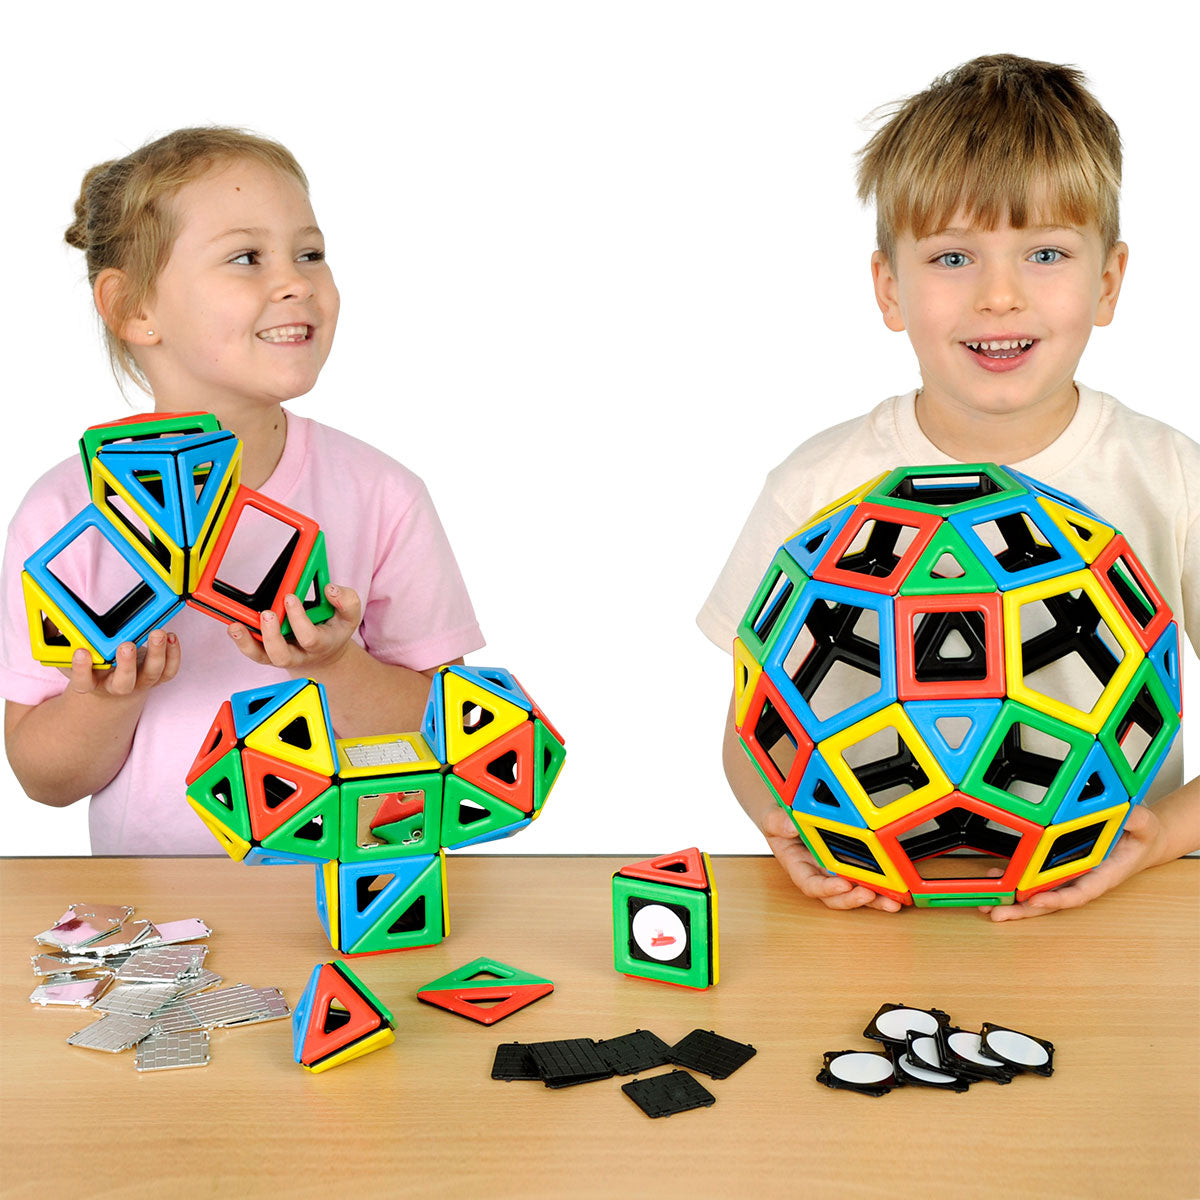 Magnetic Polydron Super Class Set, Take your magnetic construction to the next level with the Magnetic Polydron Super Class Set. This comprehensive and versatile set is perfect for any classroom or playgroup, providing endless opportunities for hands-on learning and creative exploration.Containing a whopping 184 pieces, this set offers a wide variety of shapes to work with. Included in the set are 36 squares, 60 equilateral triangles, 24 right angle triangles, 12 rectangles, 12 pentagons, 20 mirror panels, 